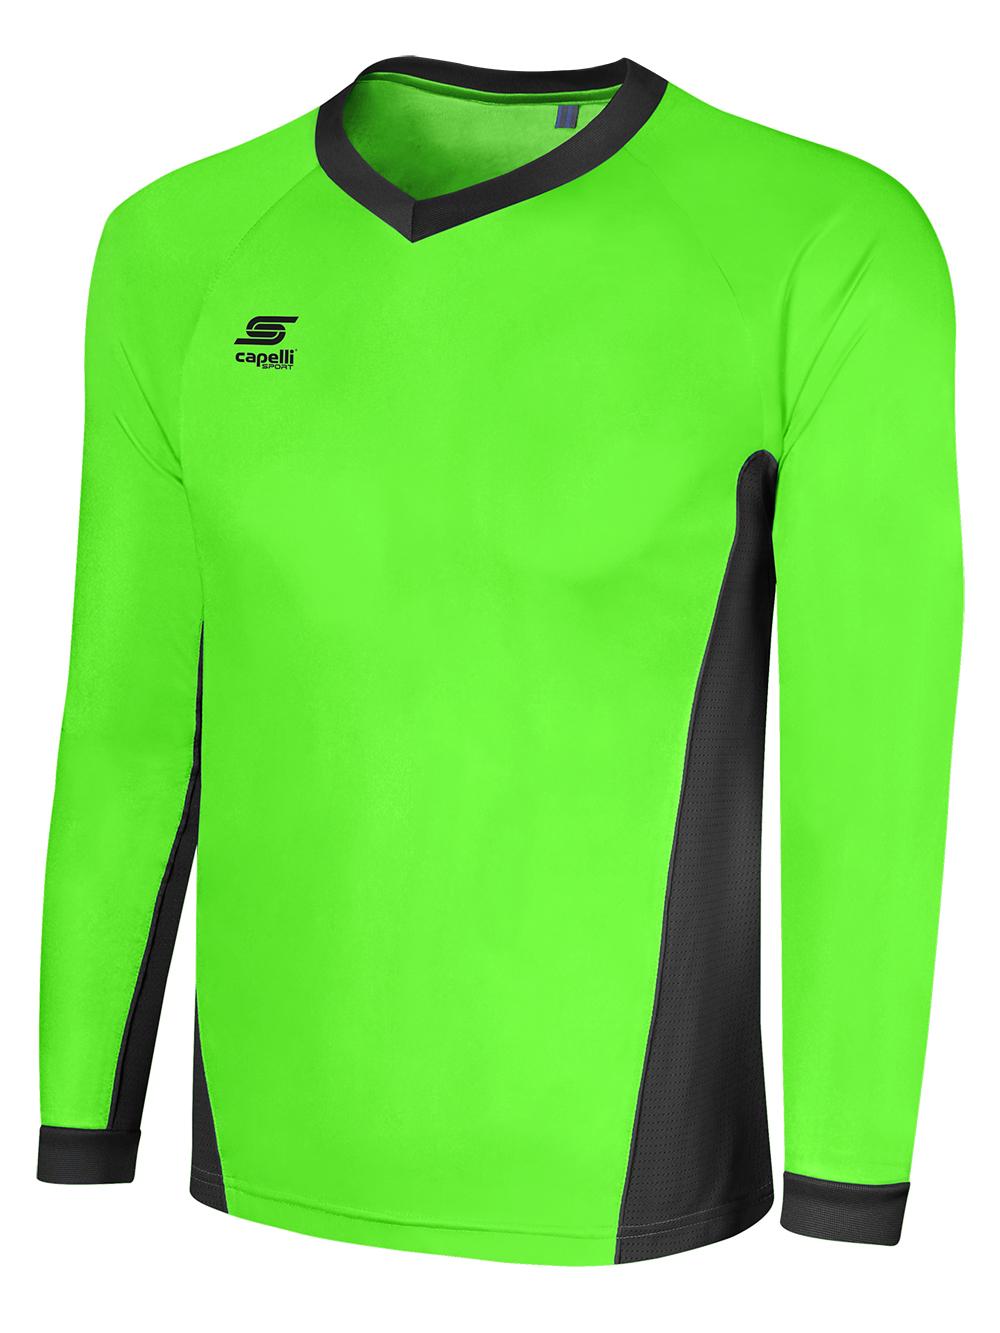 Youth NUMBER ONE Metallic Goalie Jersey L/S - CAPELLI SPORT Europe